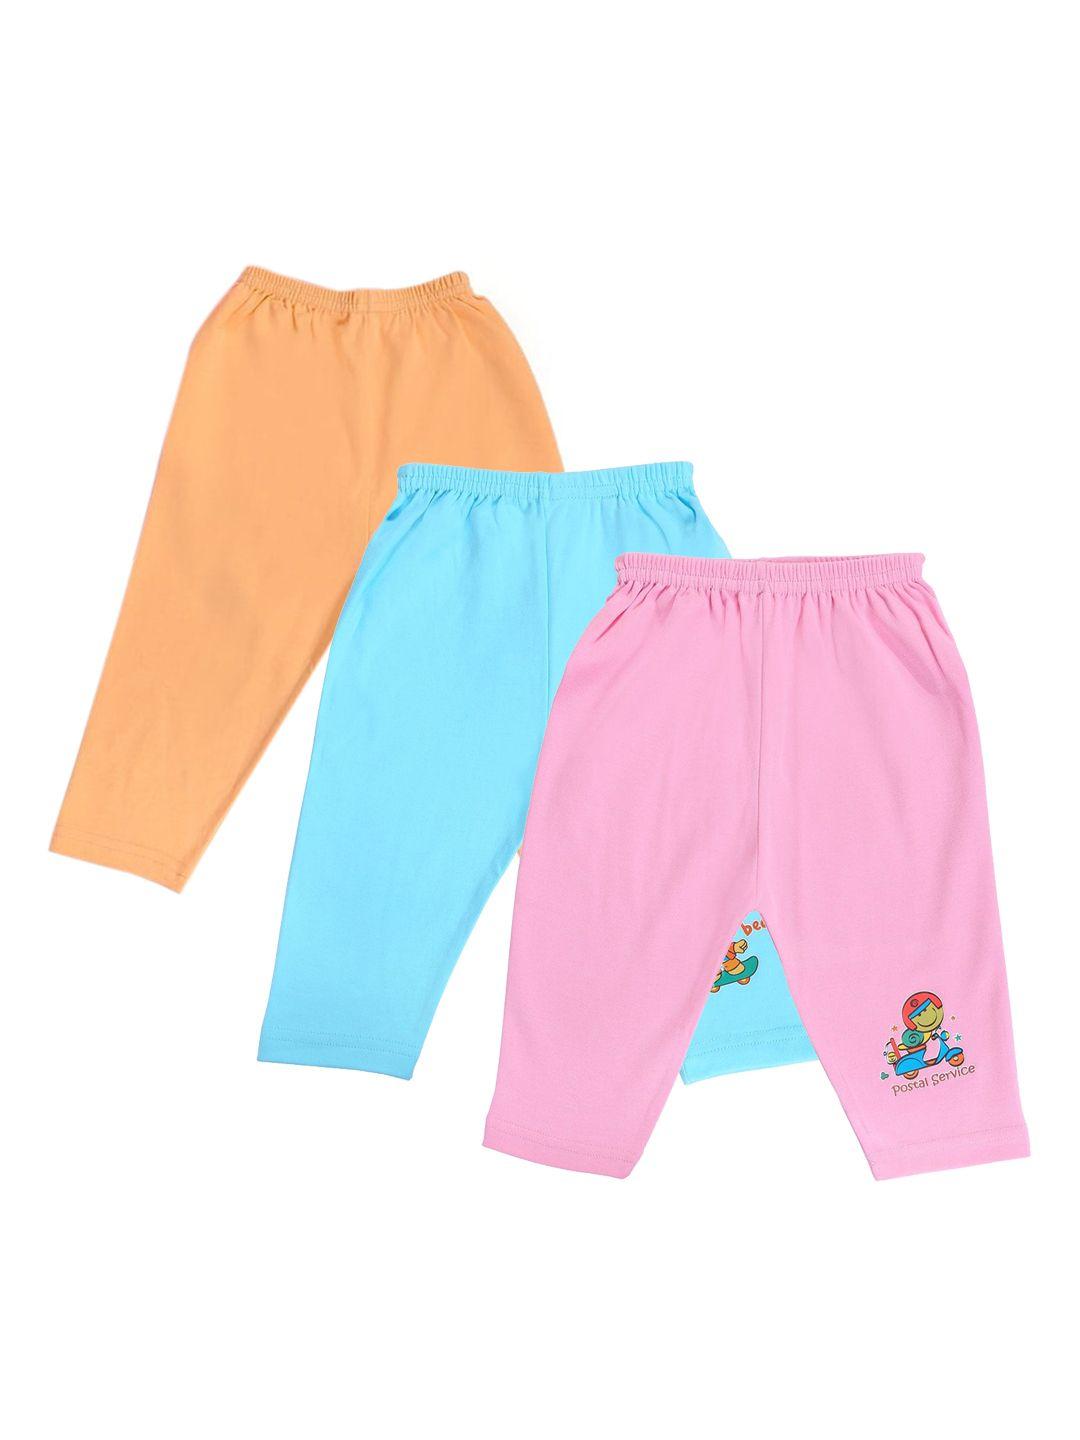 bodycare kids boys pack of 3 assorted lounge pants